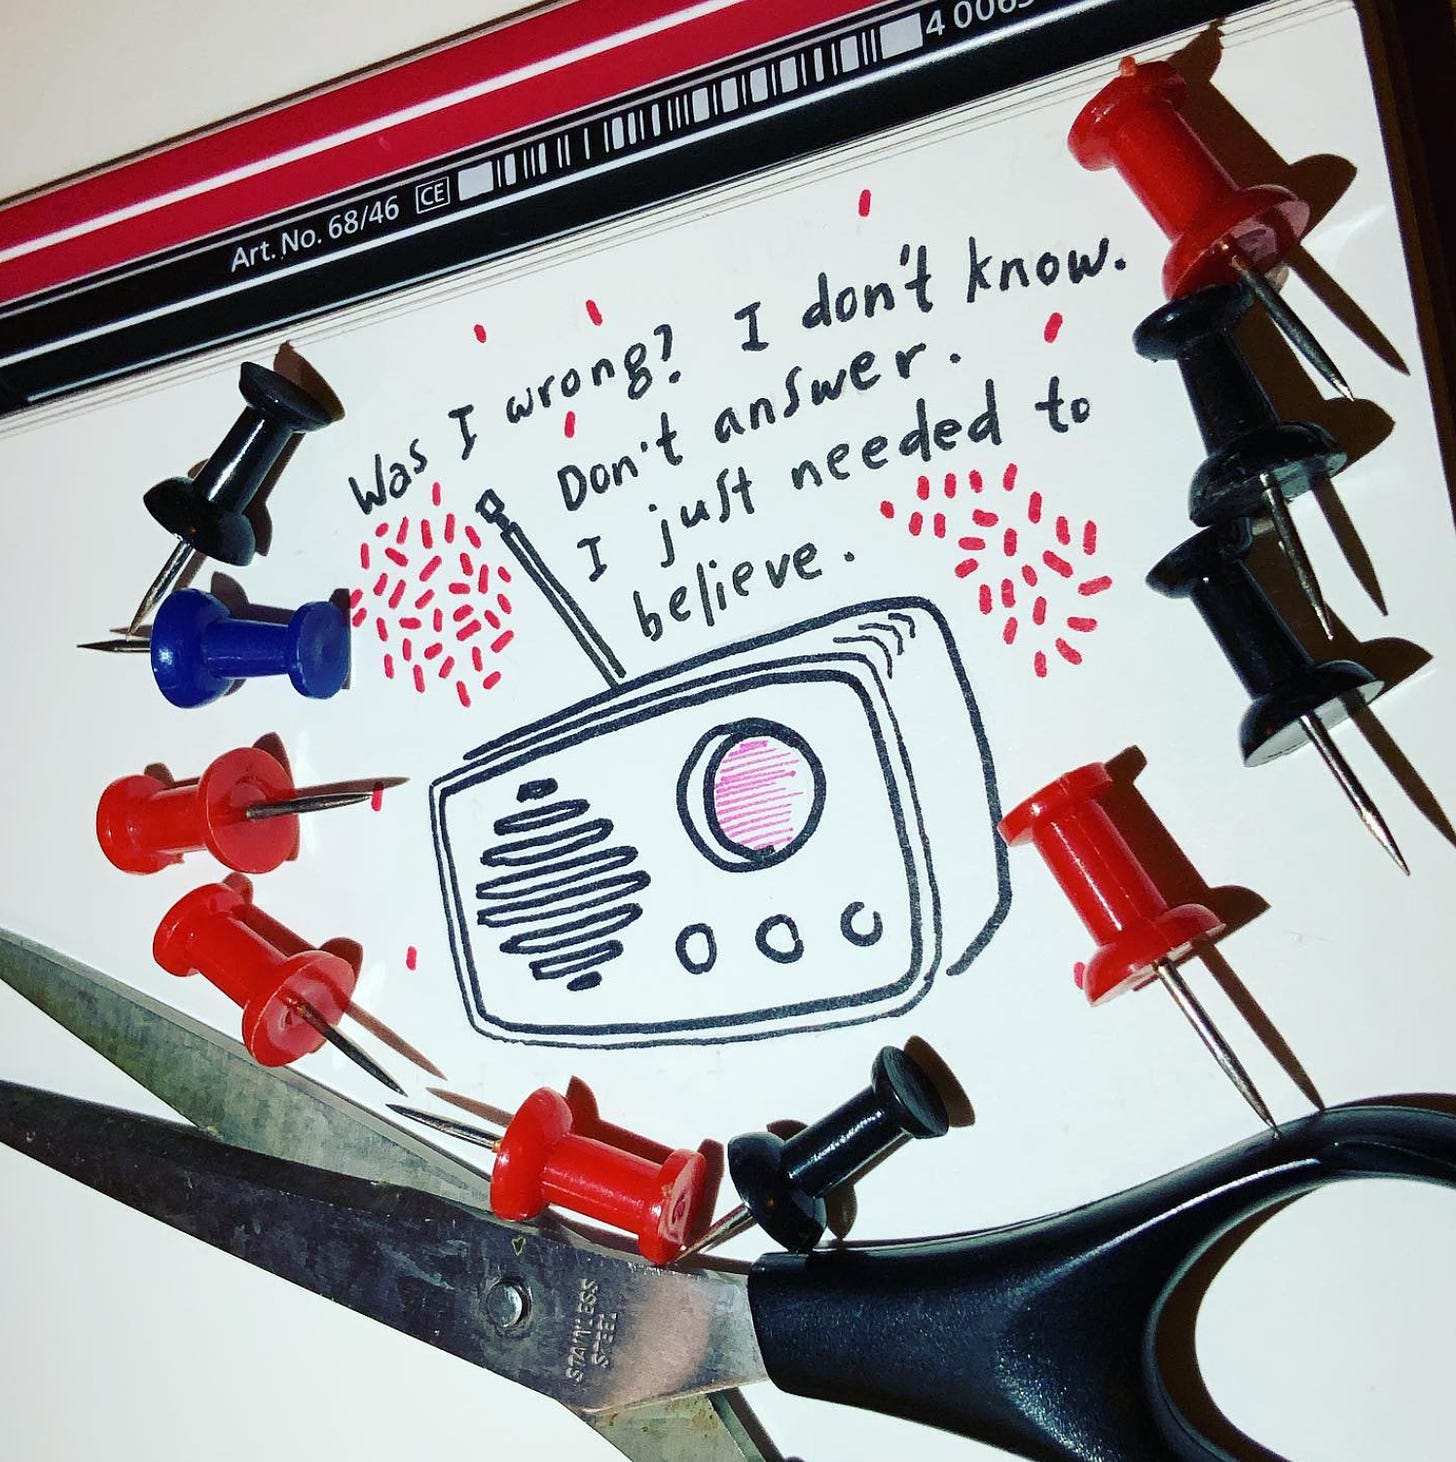 a drawing of an old-timey radio and the REM lyric "Was I wrong? I don't know, don't answer. I just needed to believe." Surrounded by real-life tacs and a pair of scissors.